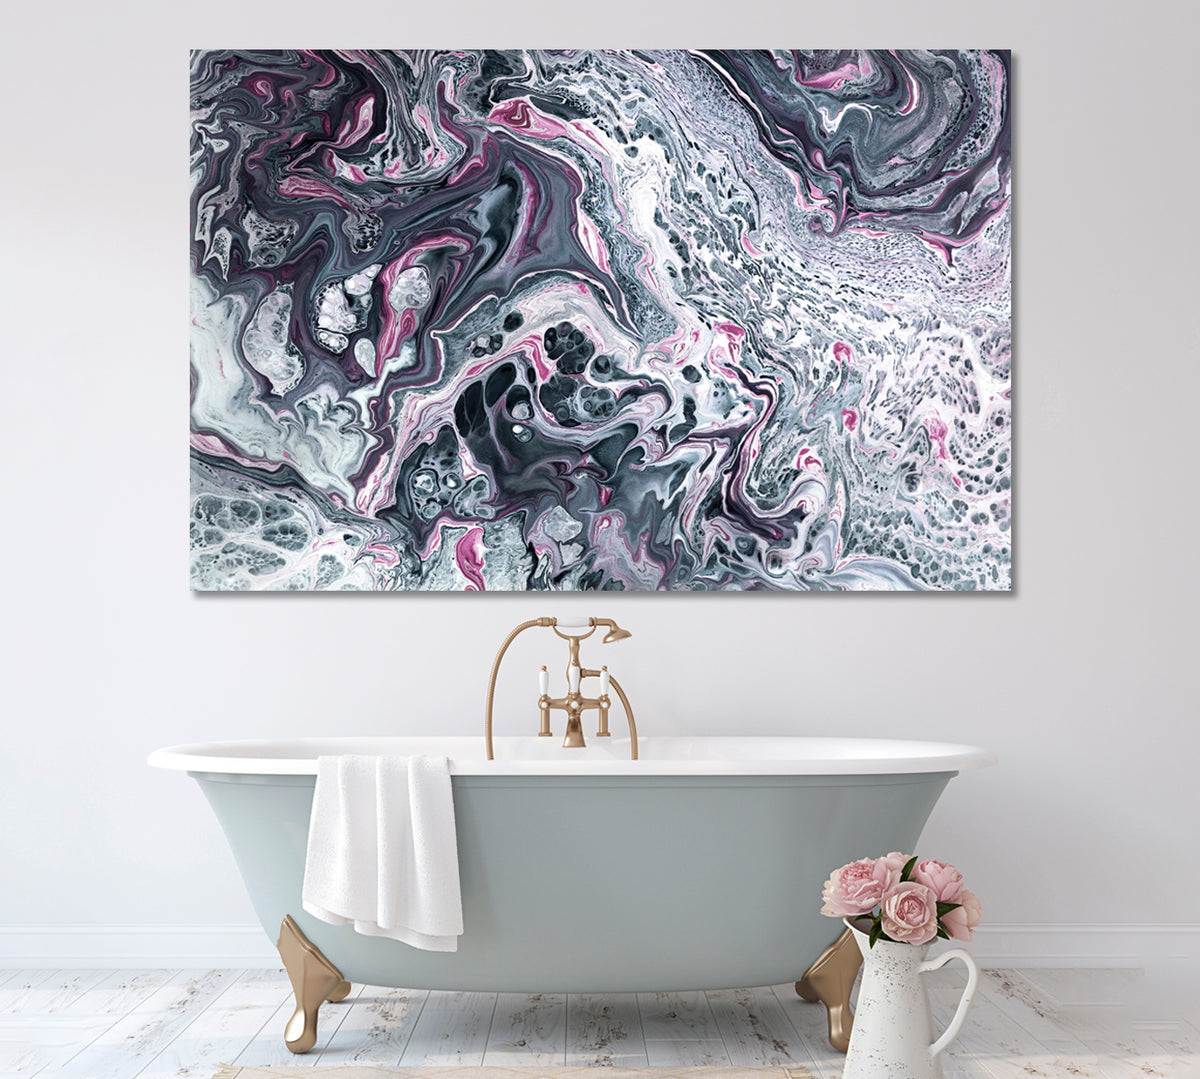 Gray and Pink Mixed Marble Ink Canvas Print ArtLexy 1 Panel 24"x16" inches 